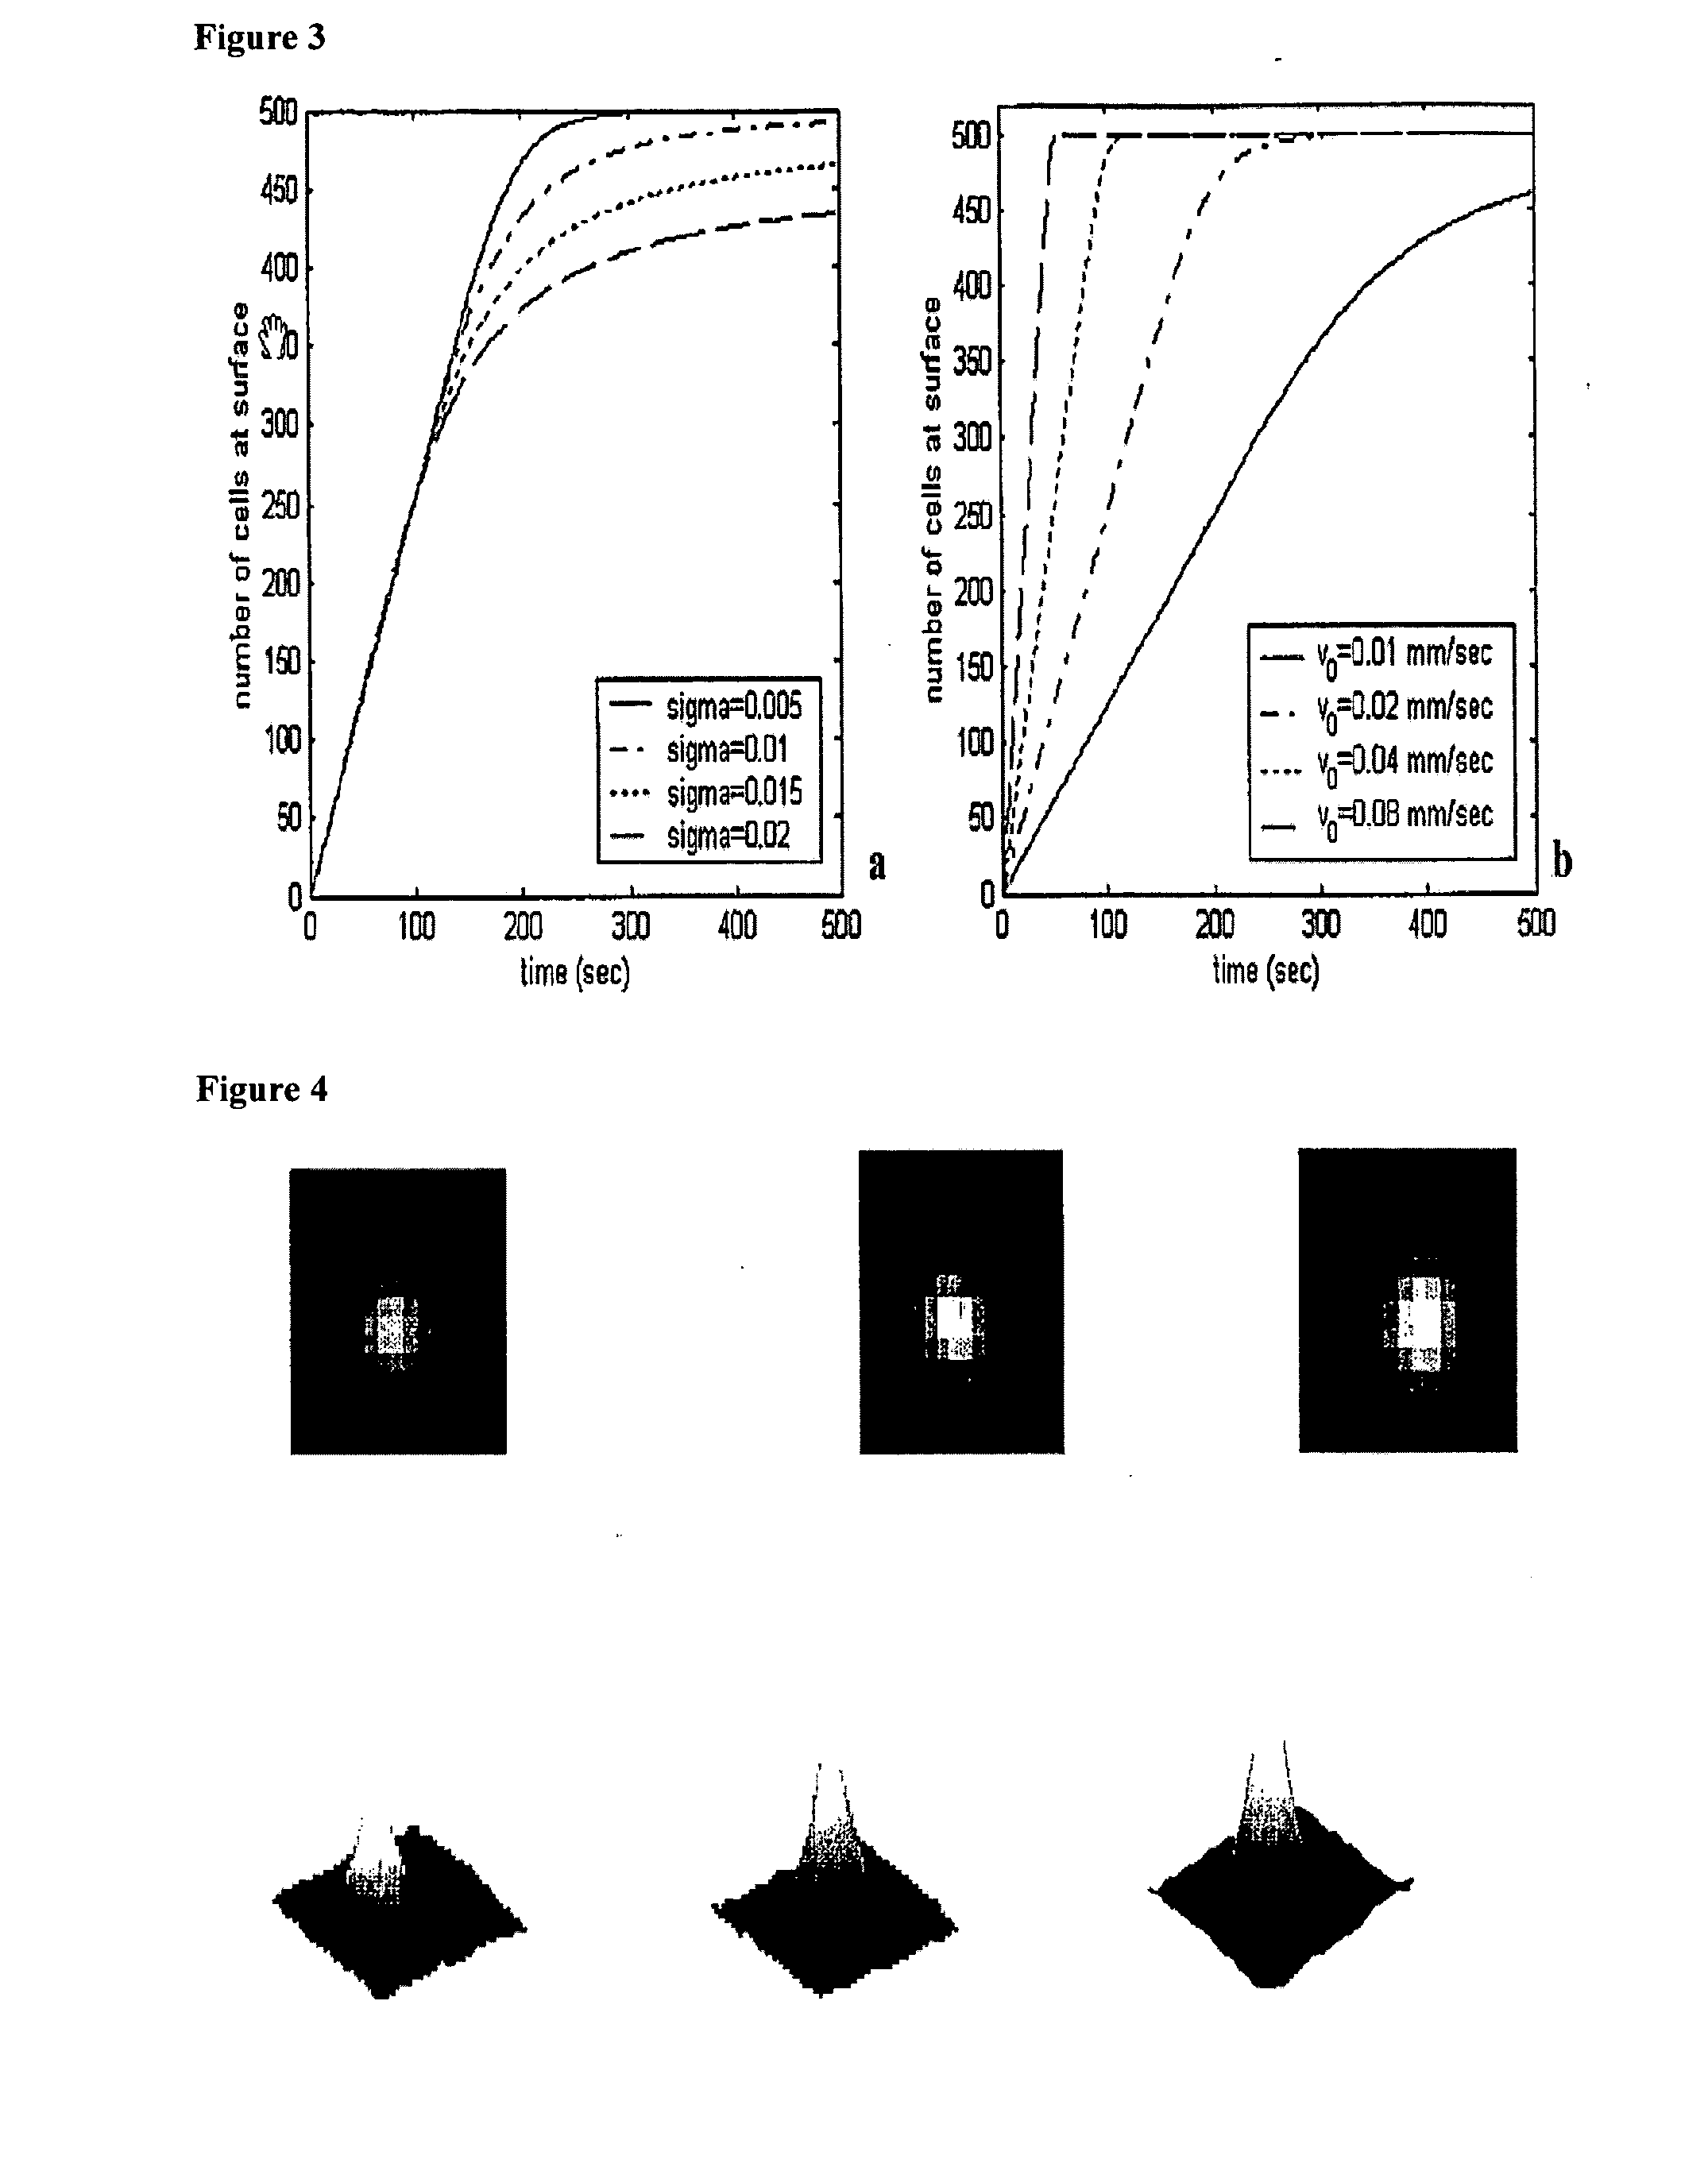 Methods and Algorithms for Cell Enumeration in a Low-Cost Cytometer